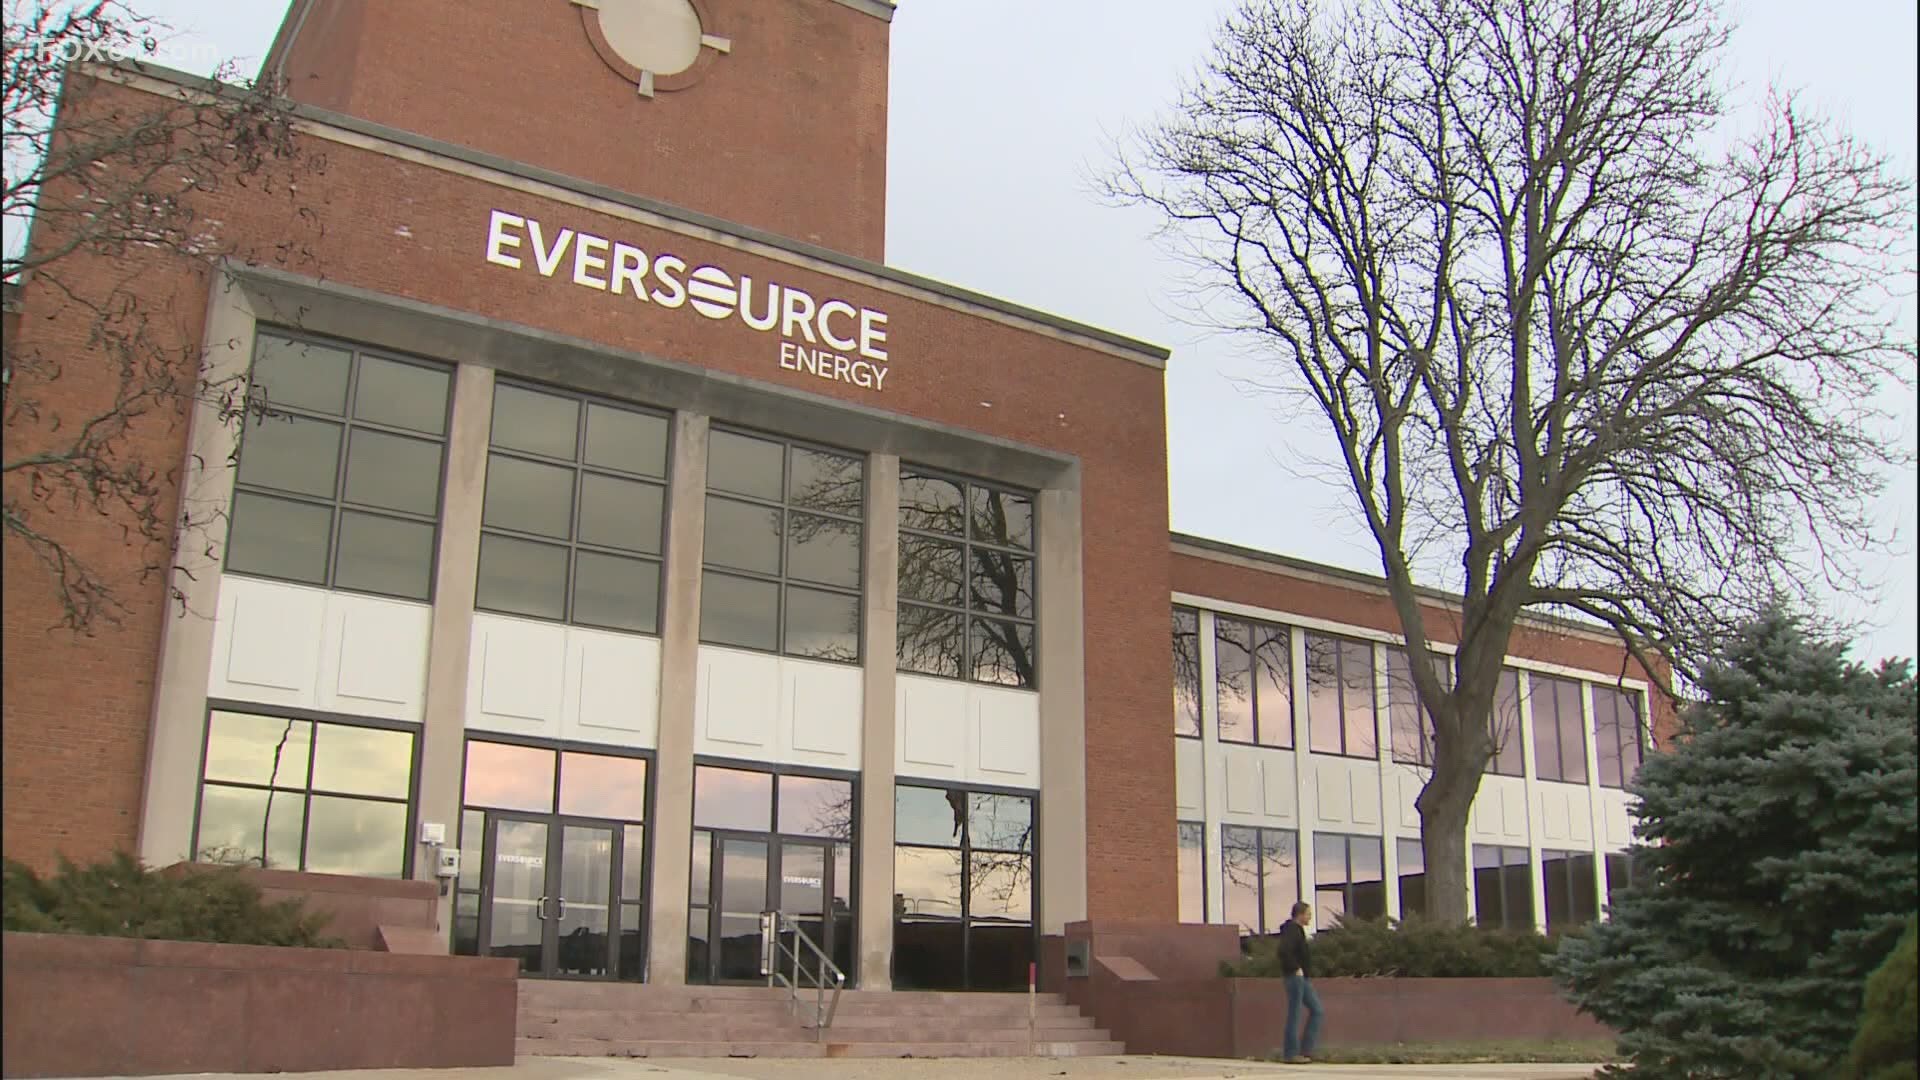 Eversource bore the brunt of the criticism. They found UI’s performance underwhelming but markedly better